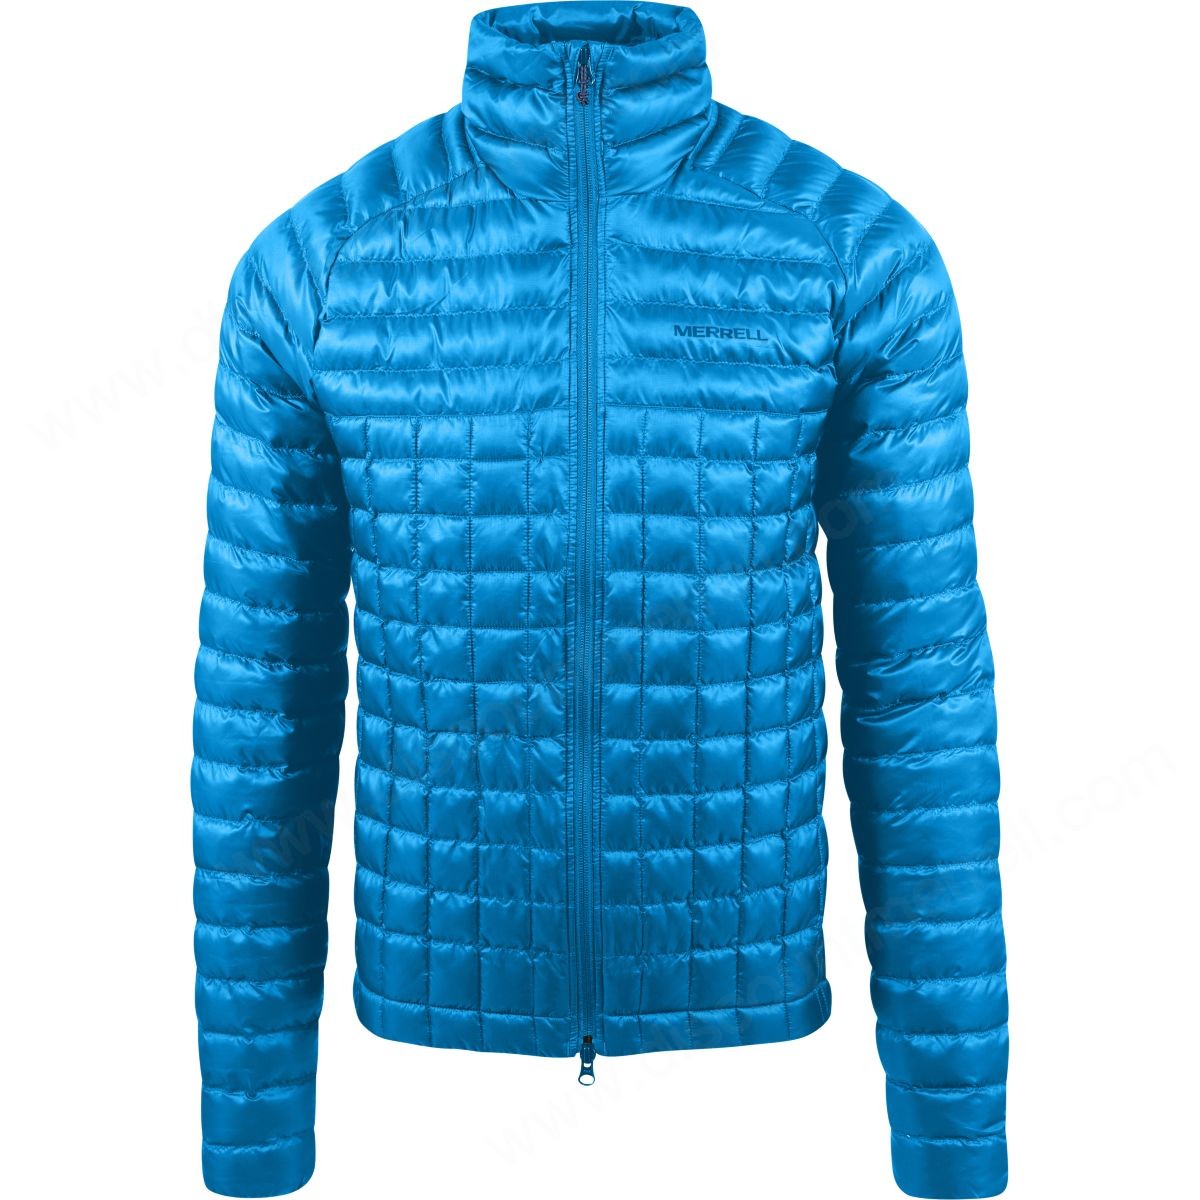 Merrell Man's Micro Lite Puffer Coat French Blue Solid - Merrell Man's Micro Lite Puffer Coat French Blue Solid